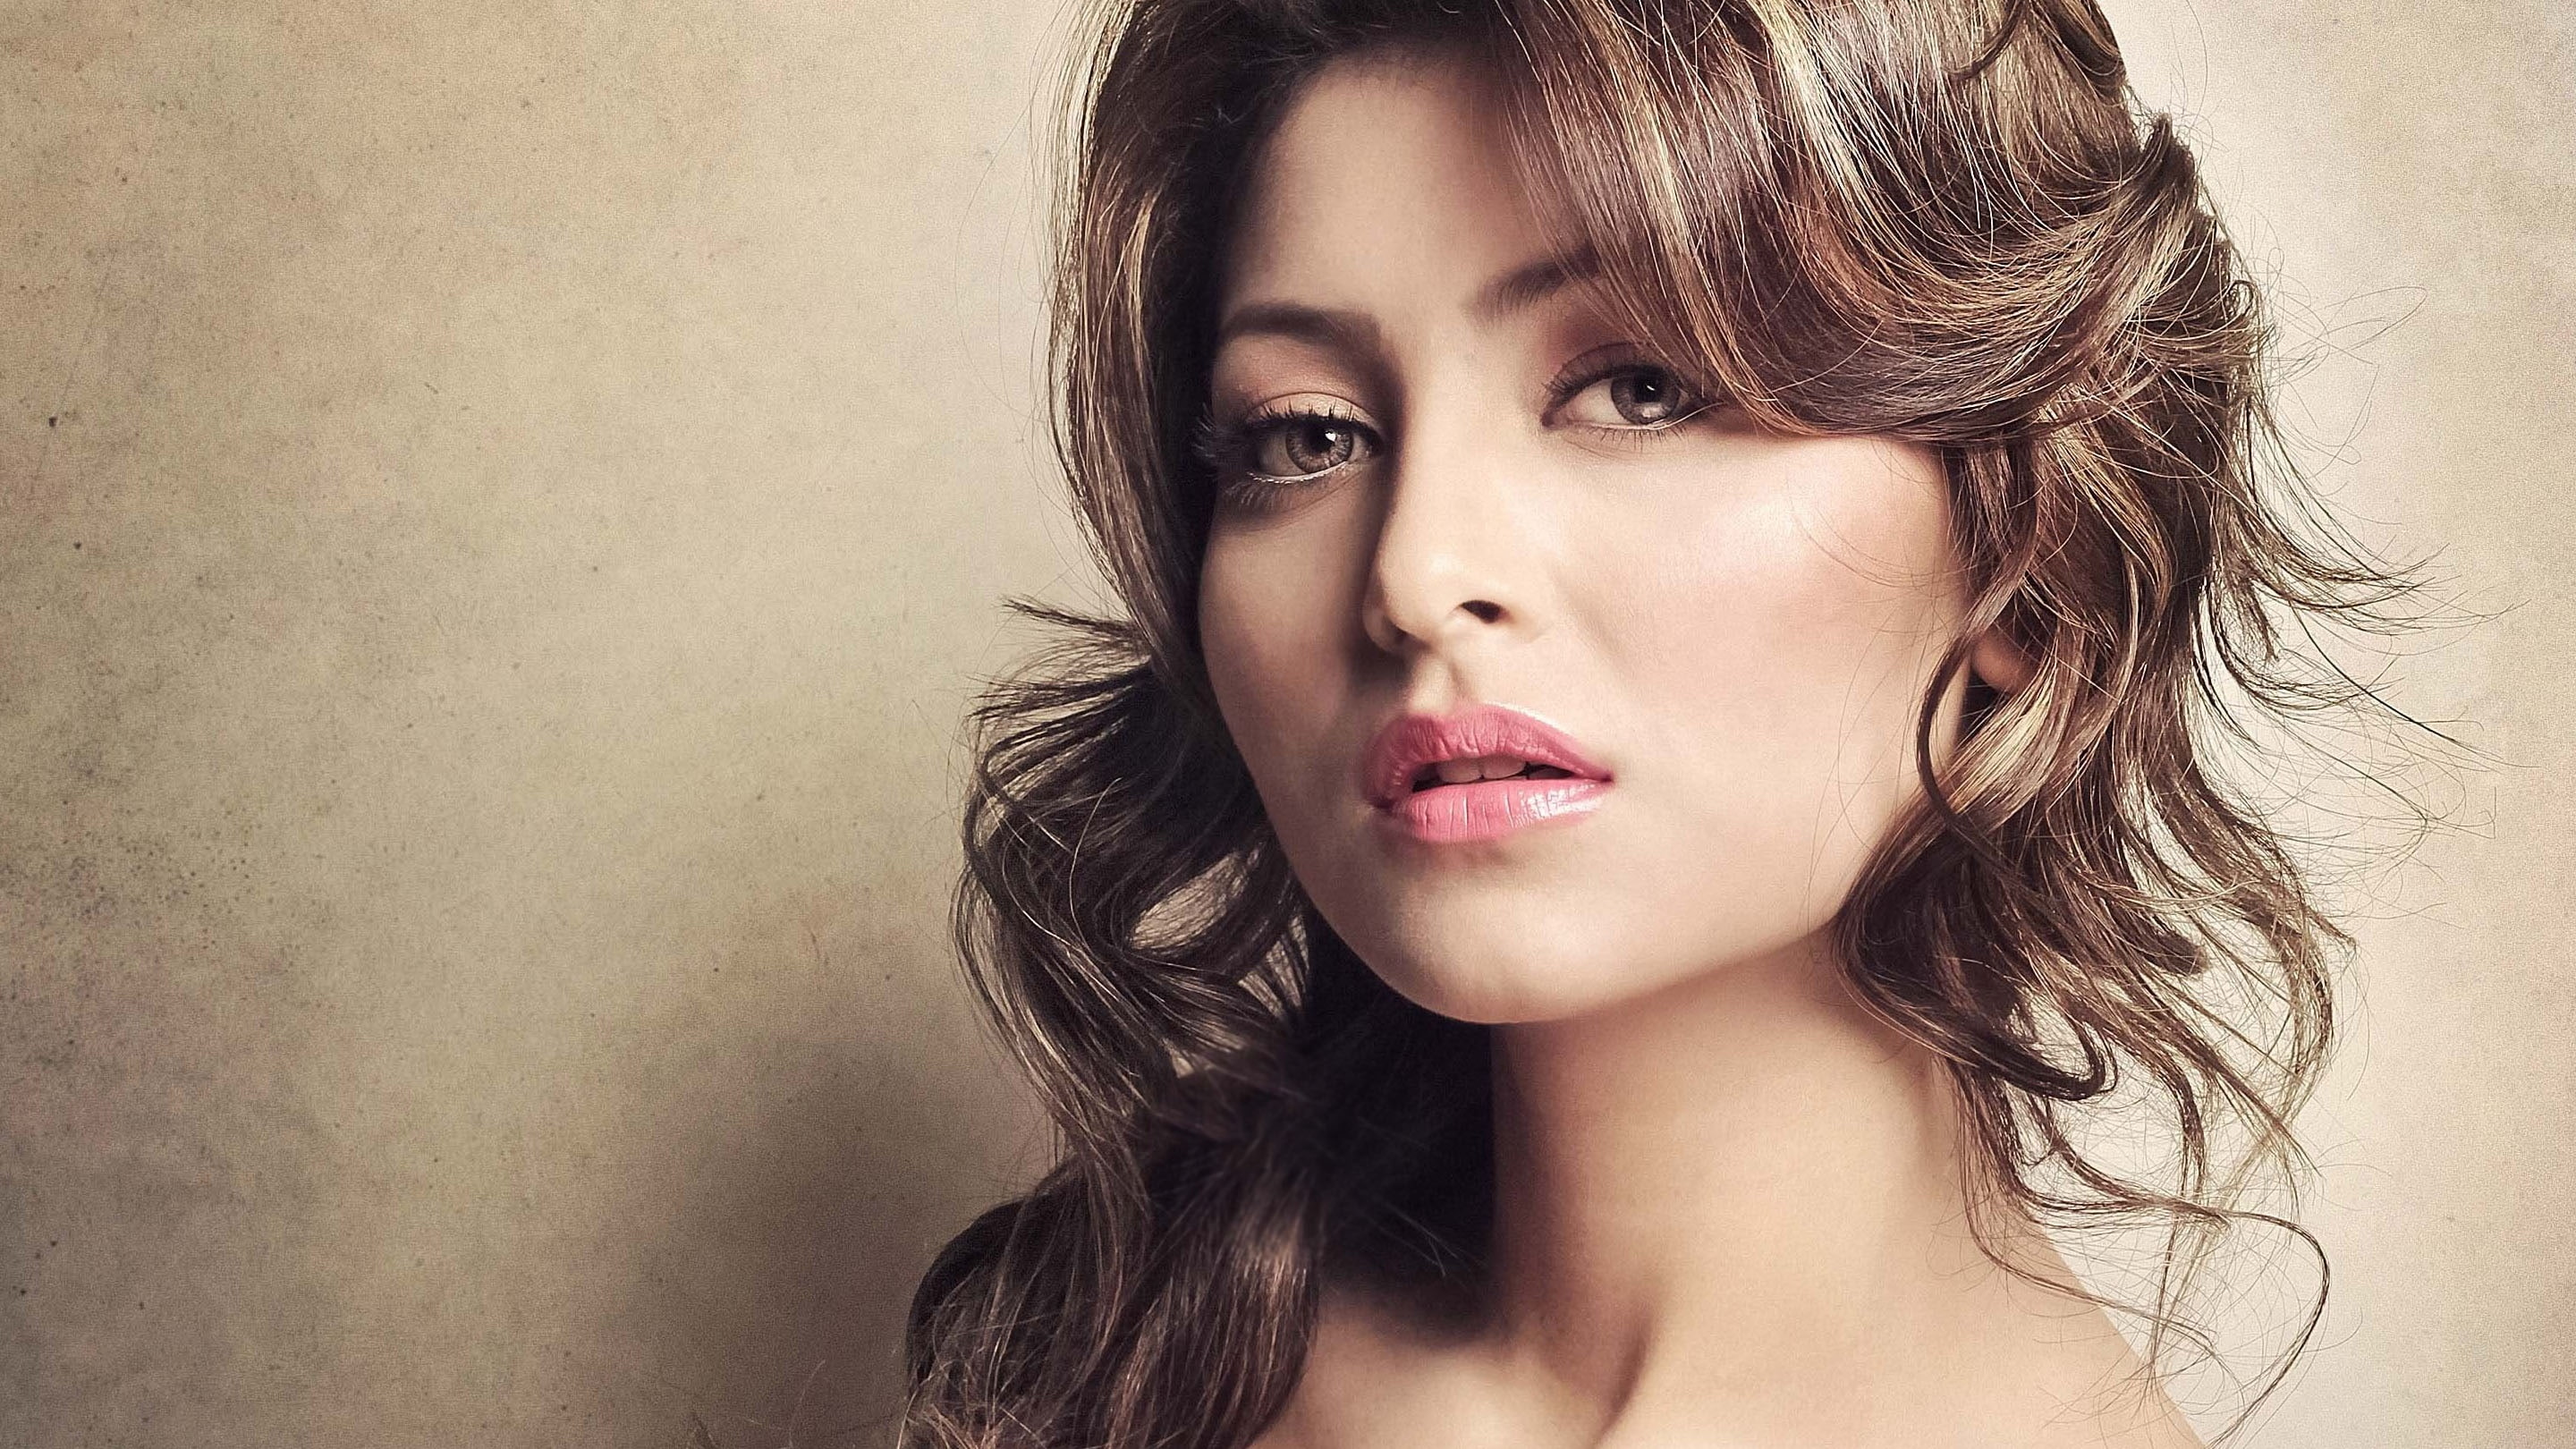 Actress, Urvashi Rautela, Bollywood, portrait, one person, young adult